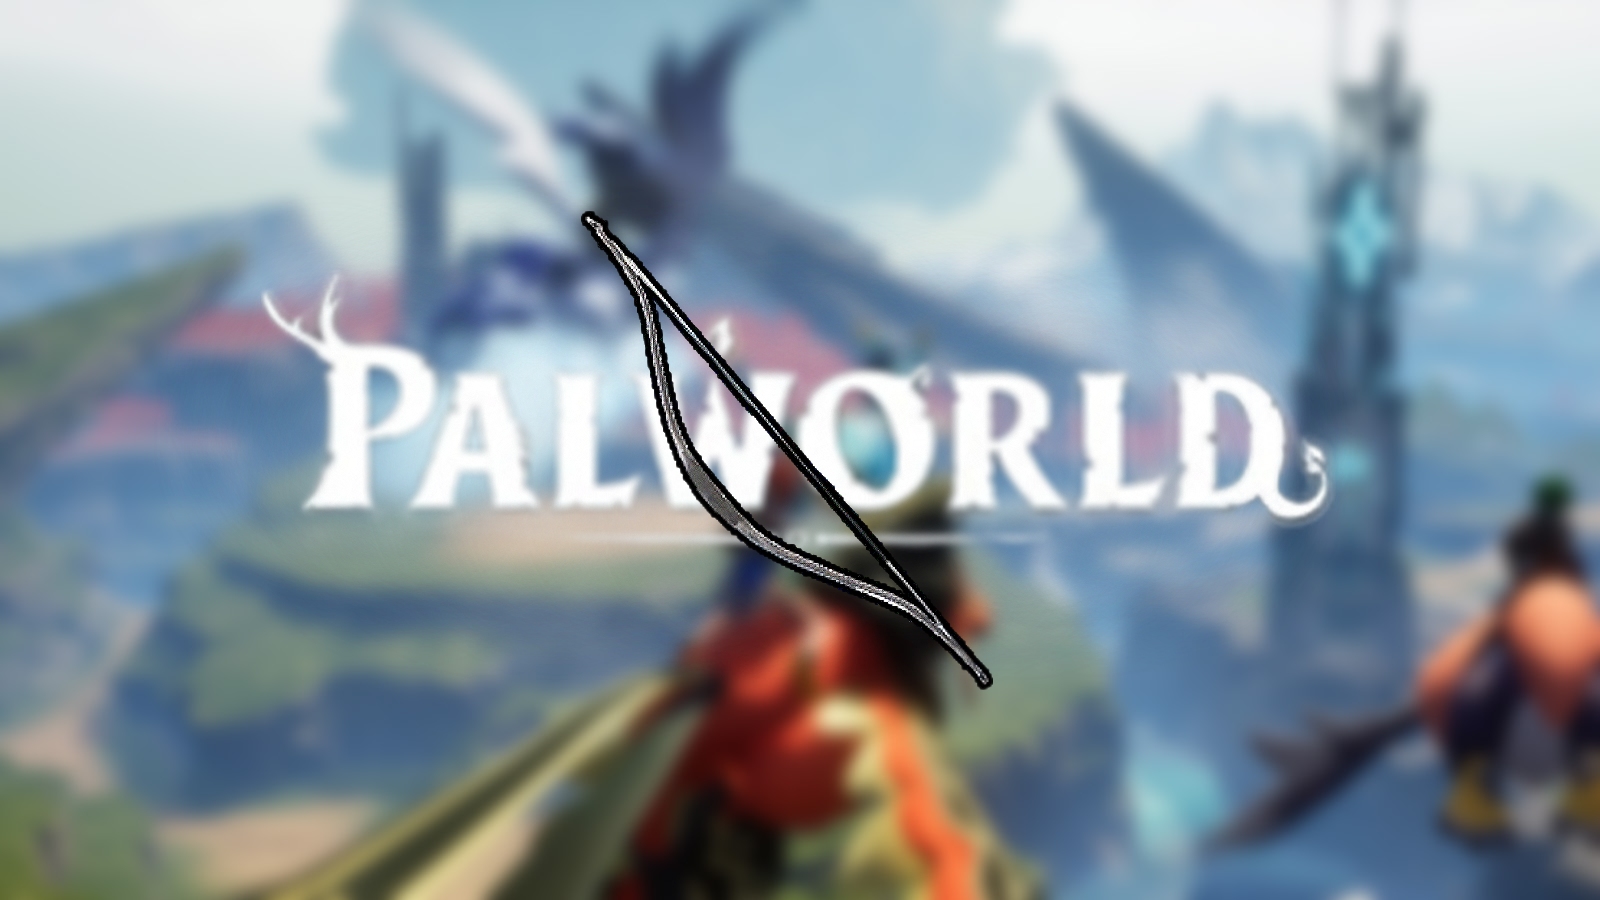 Master the Art of Palworld and Acquire the Elusive Legendary Old Bow